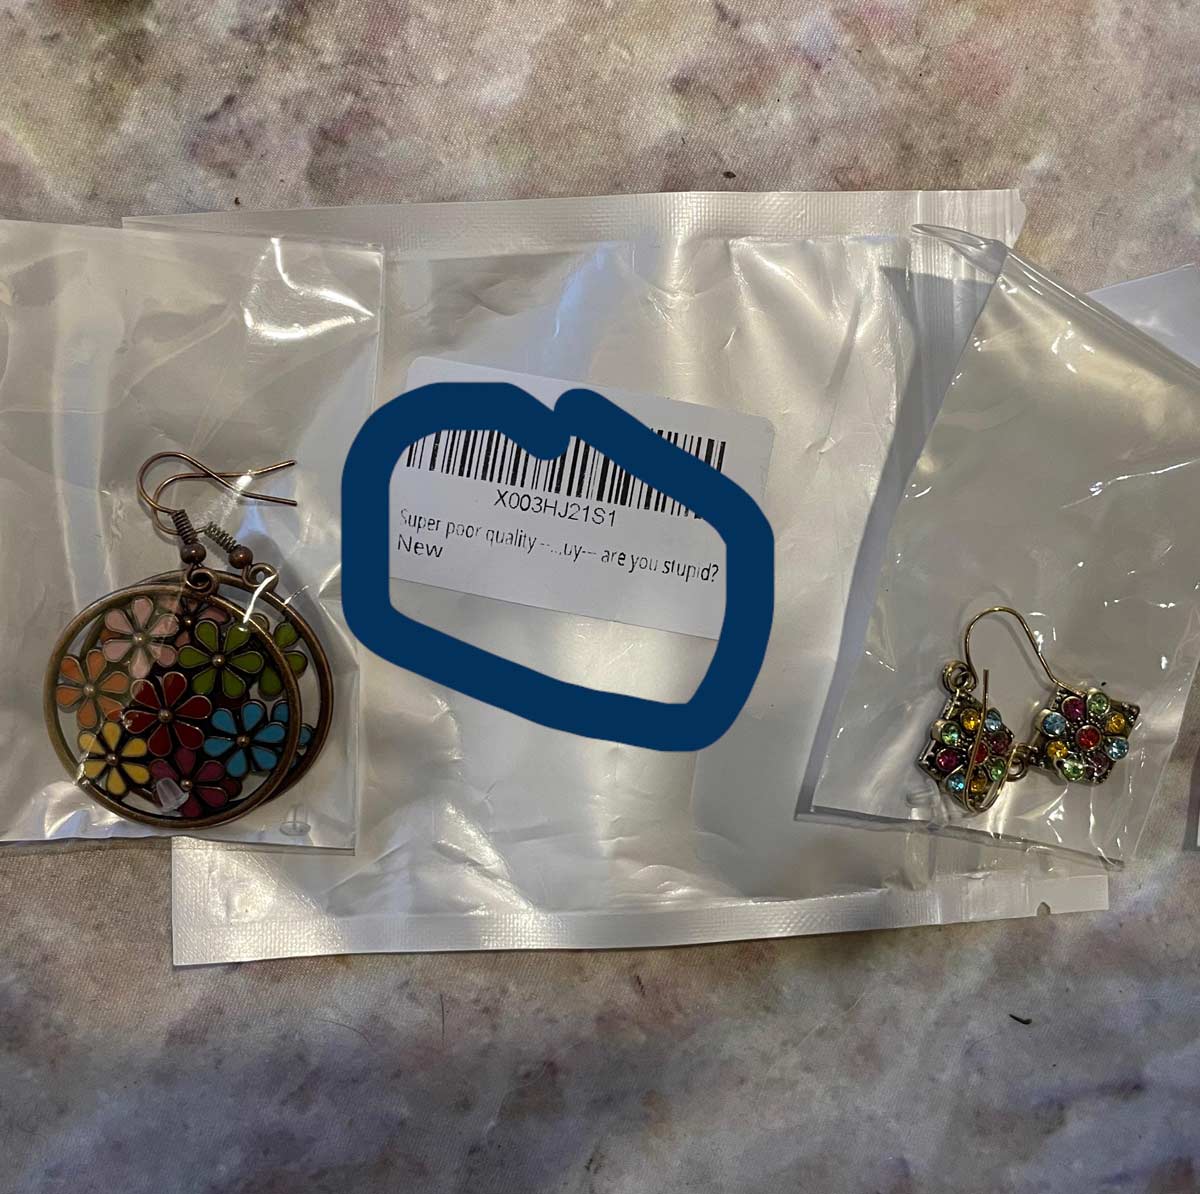 These earrings bought on Amazon are labeled “Super poor quality...by, are you stupid?”